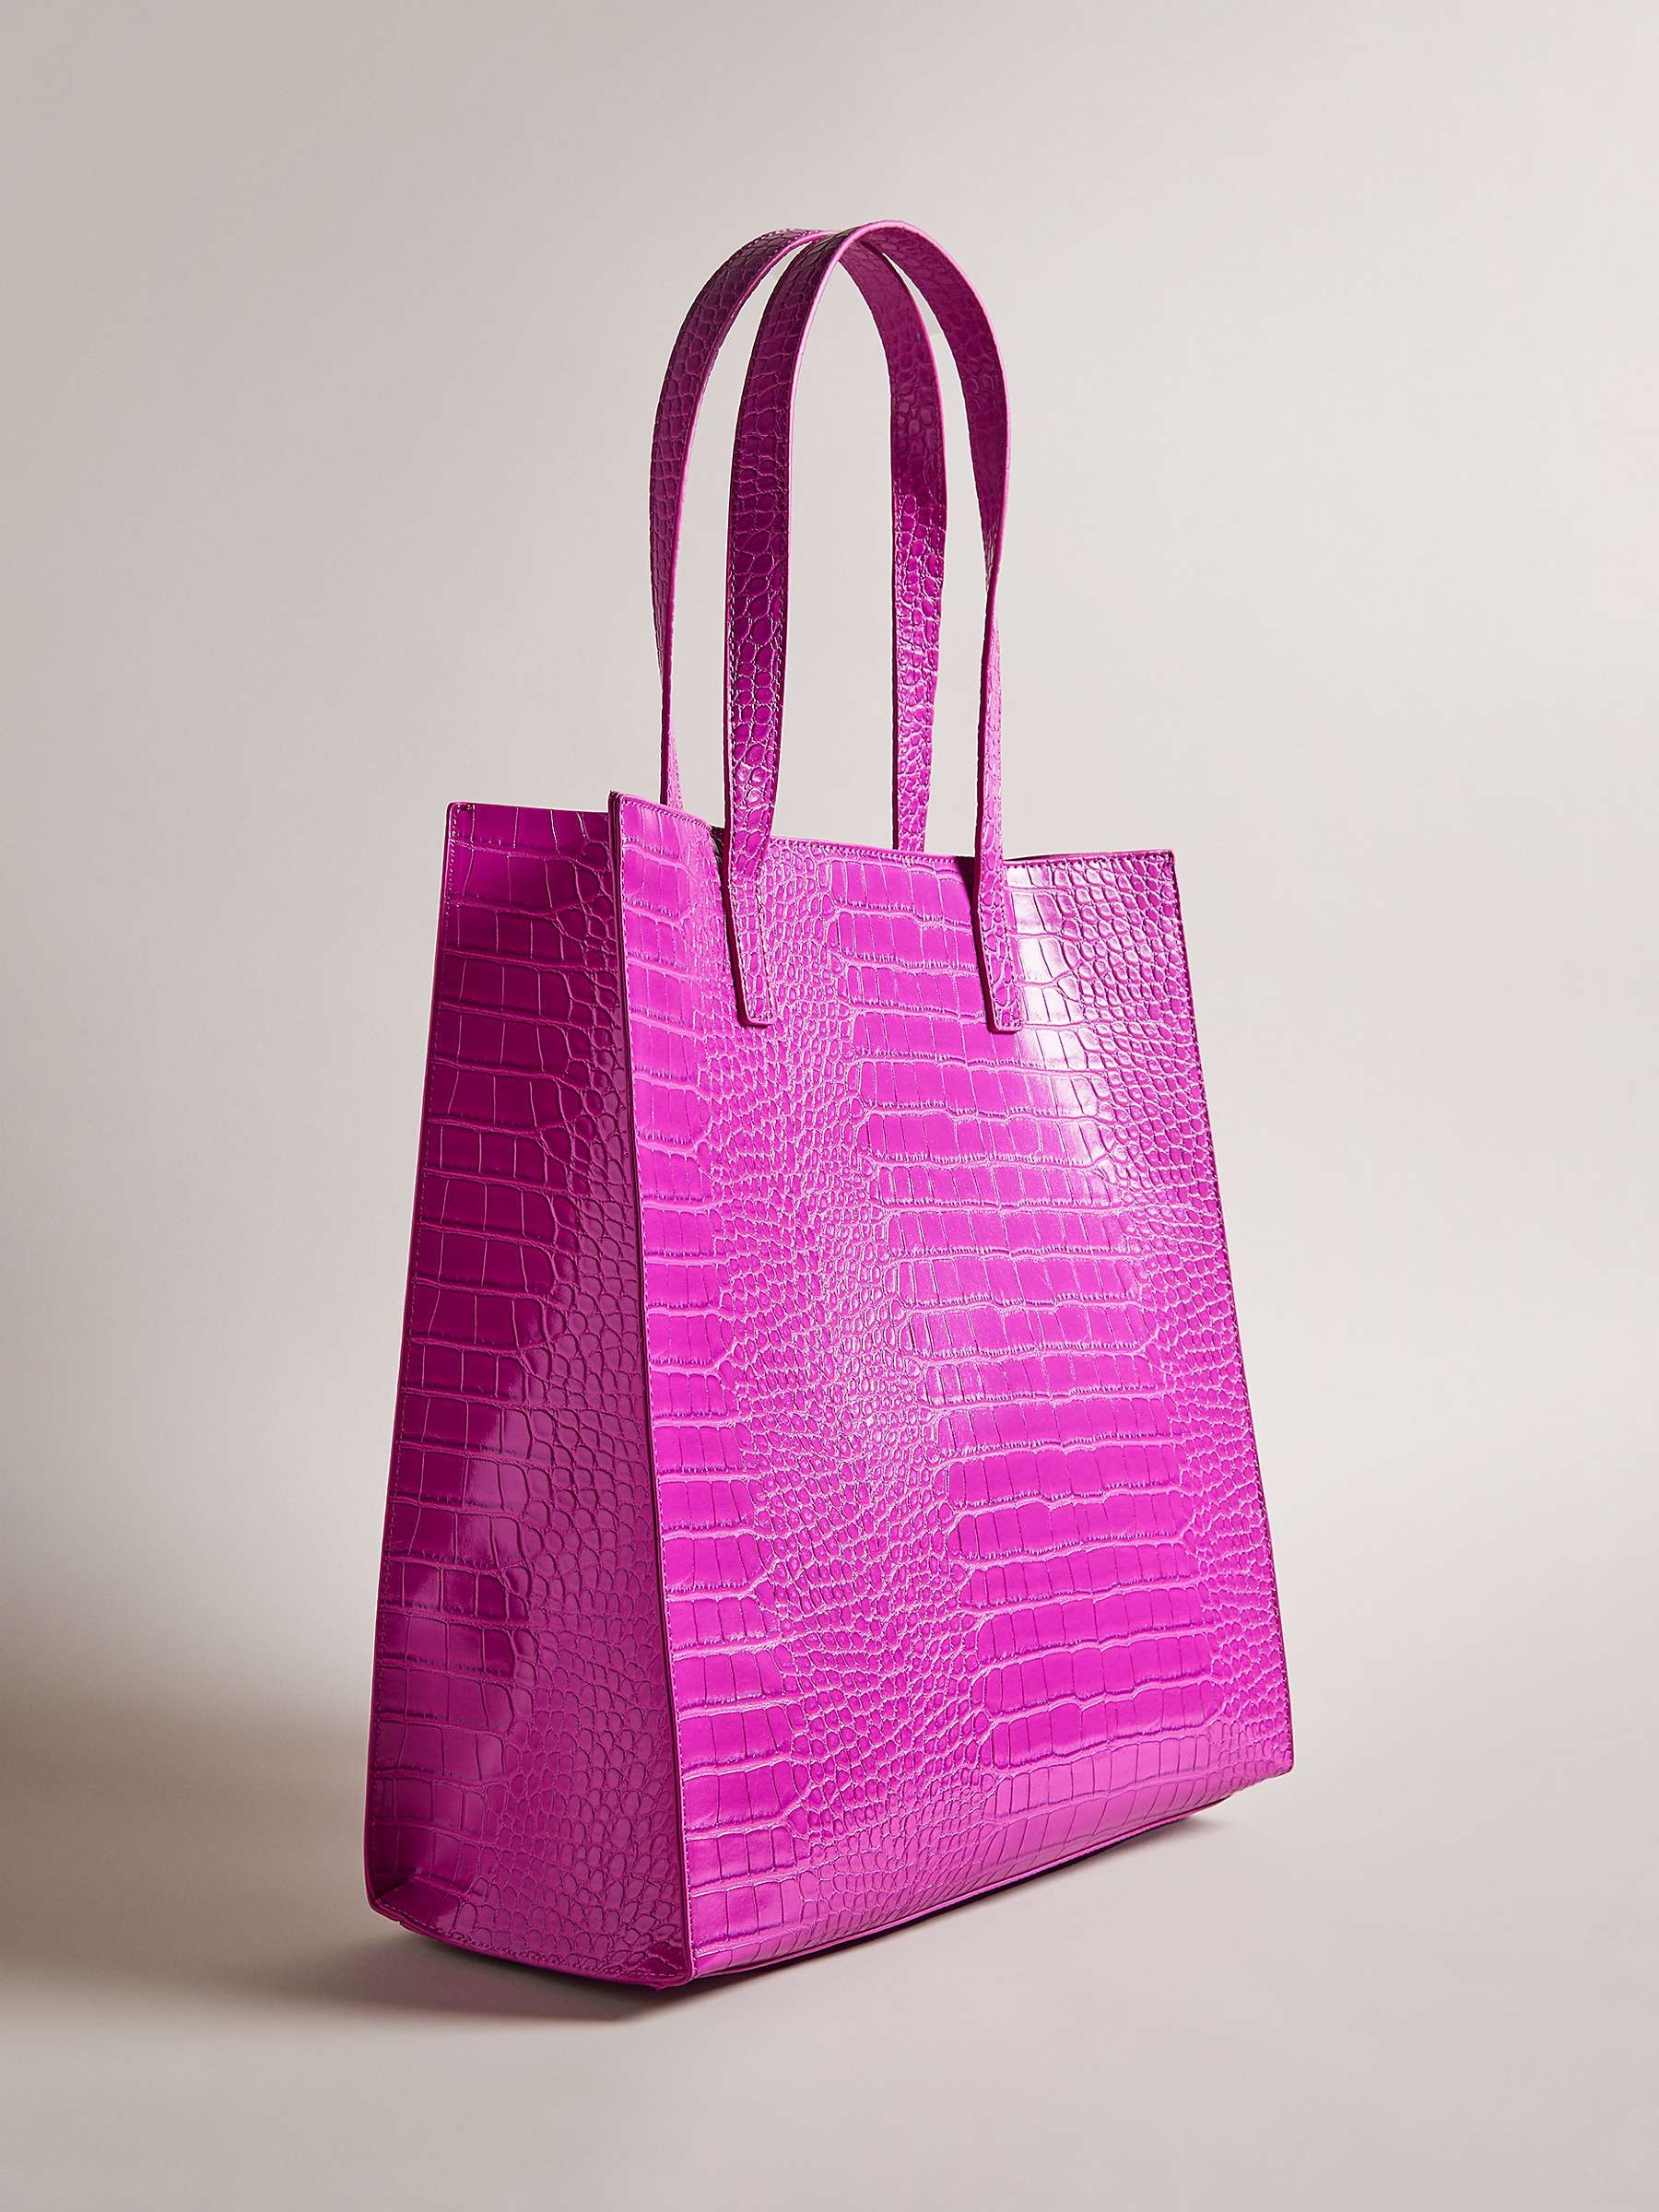 Ted Baker Croccon Large Icon Shopper Bag, Hot Pink at John Lewis & Partners